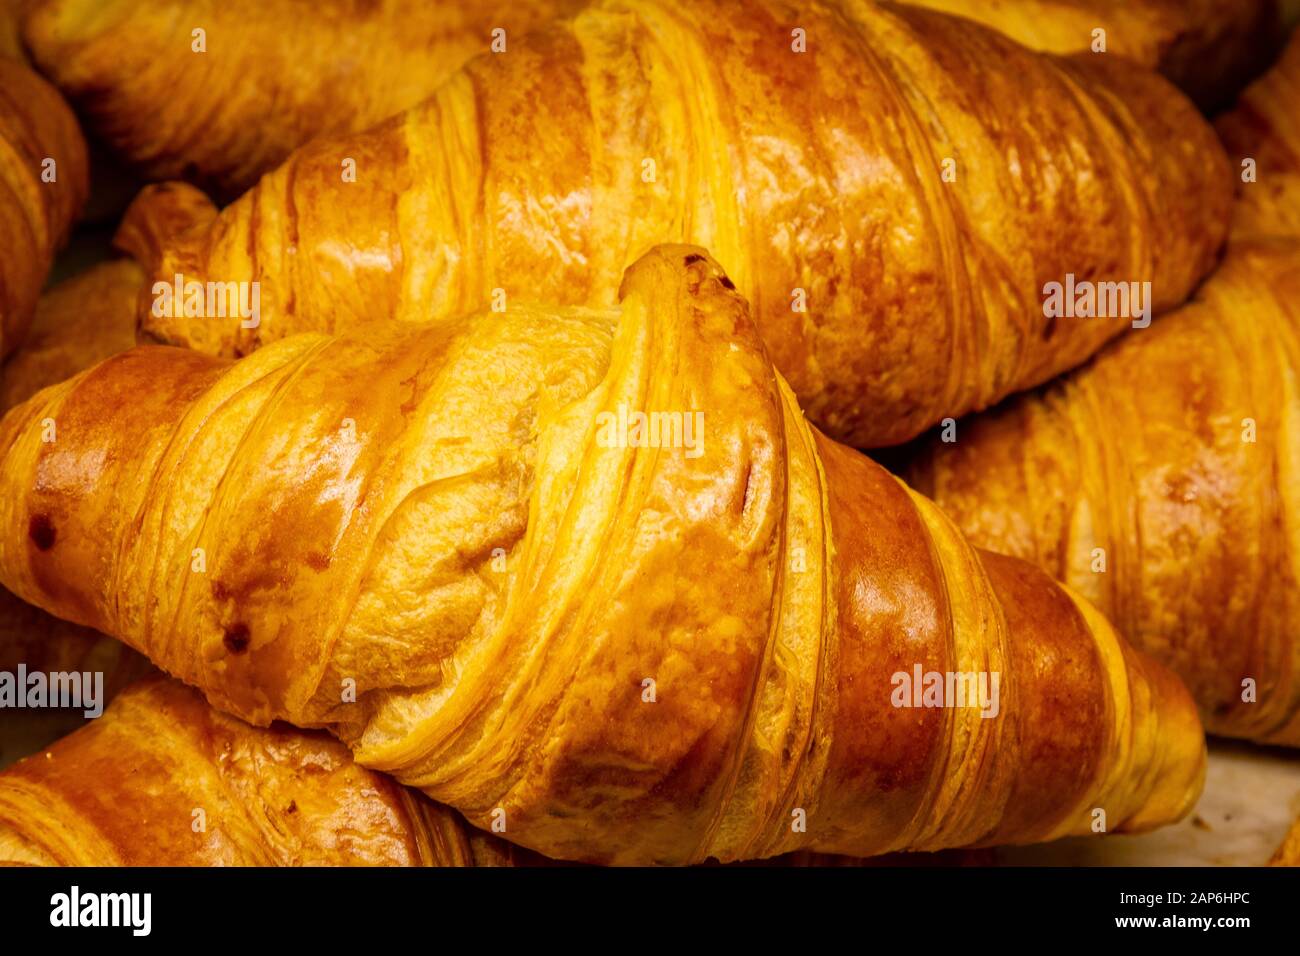 Oven Baked Golden Brown Croissants close-up Stock Photo